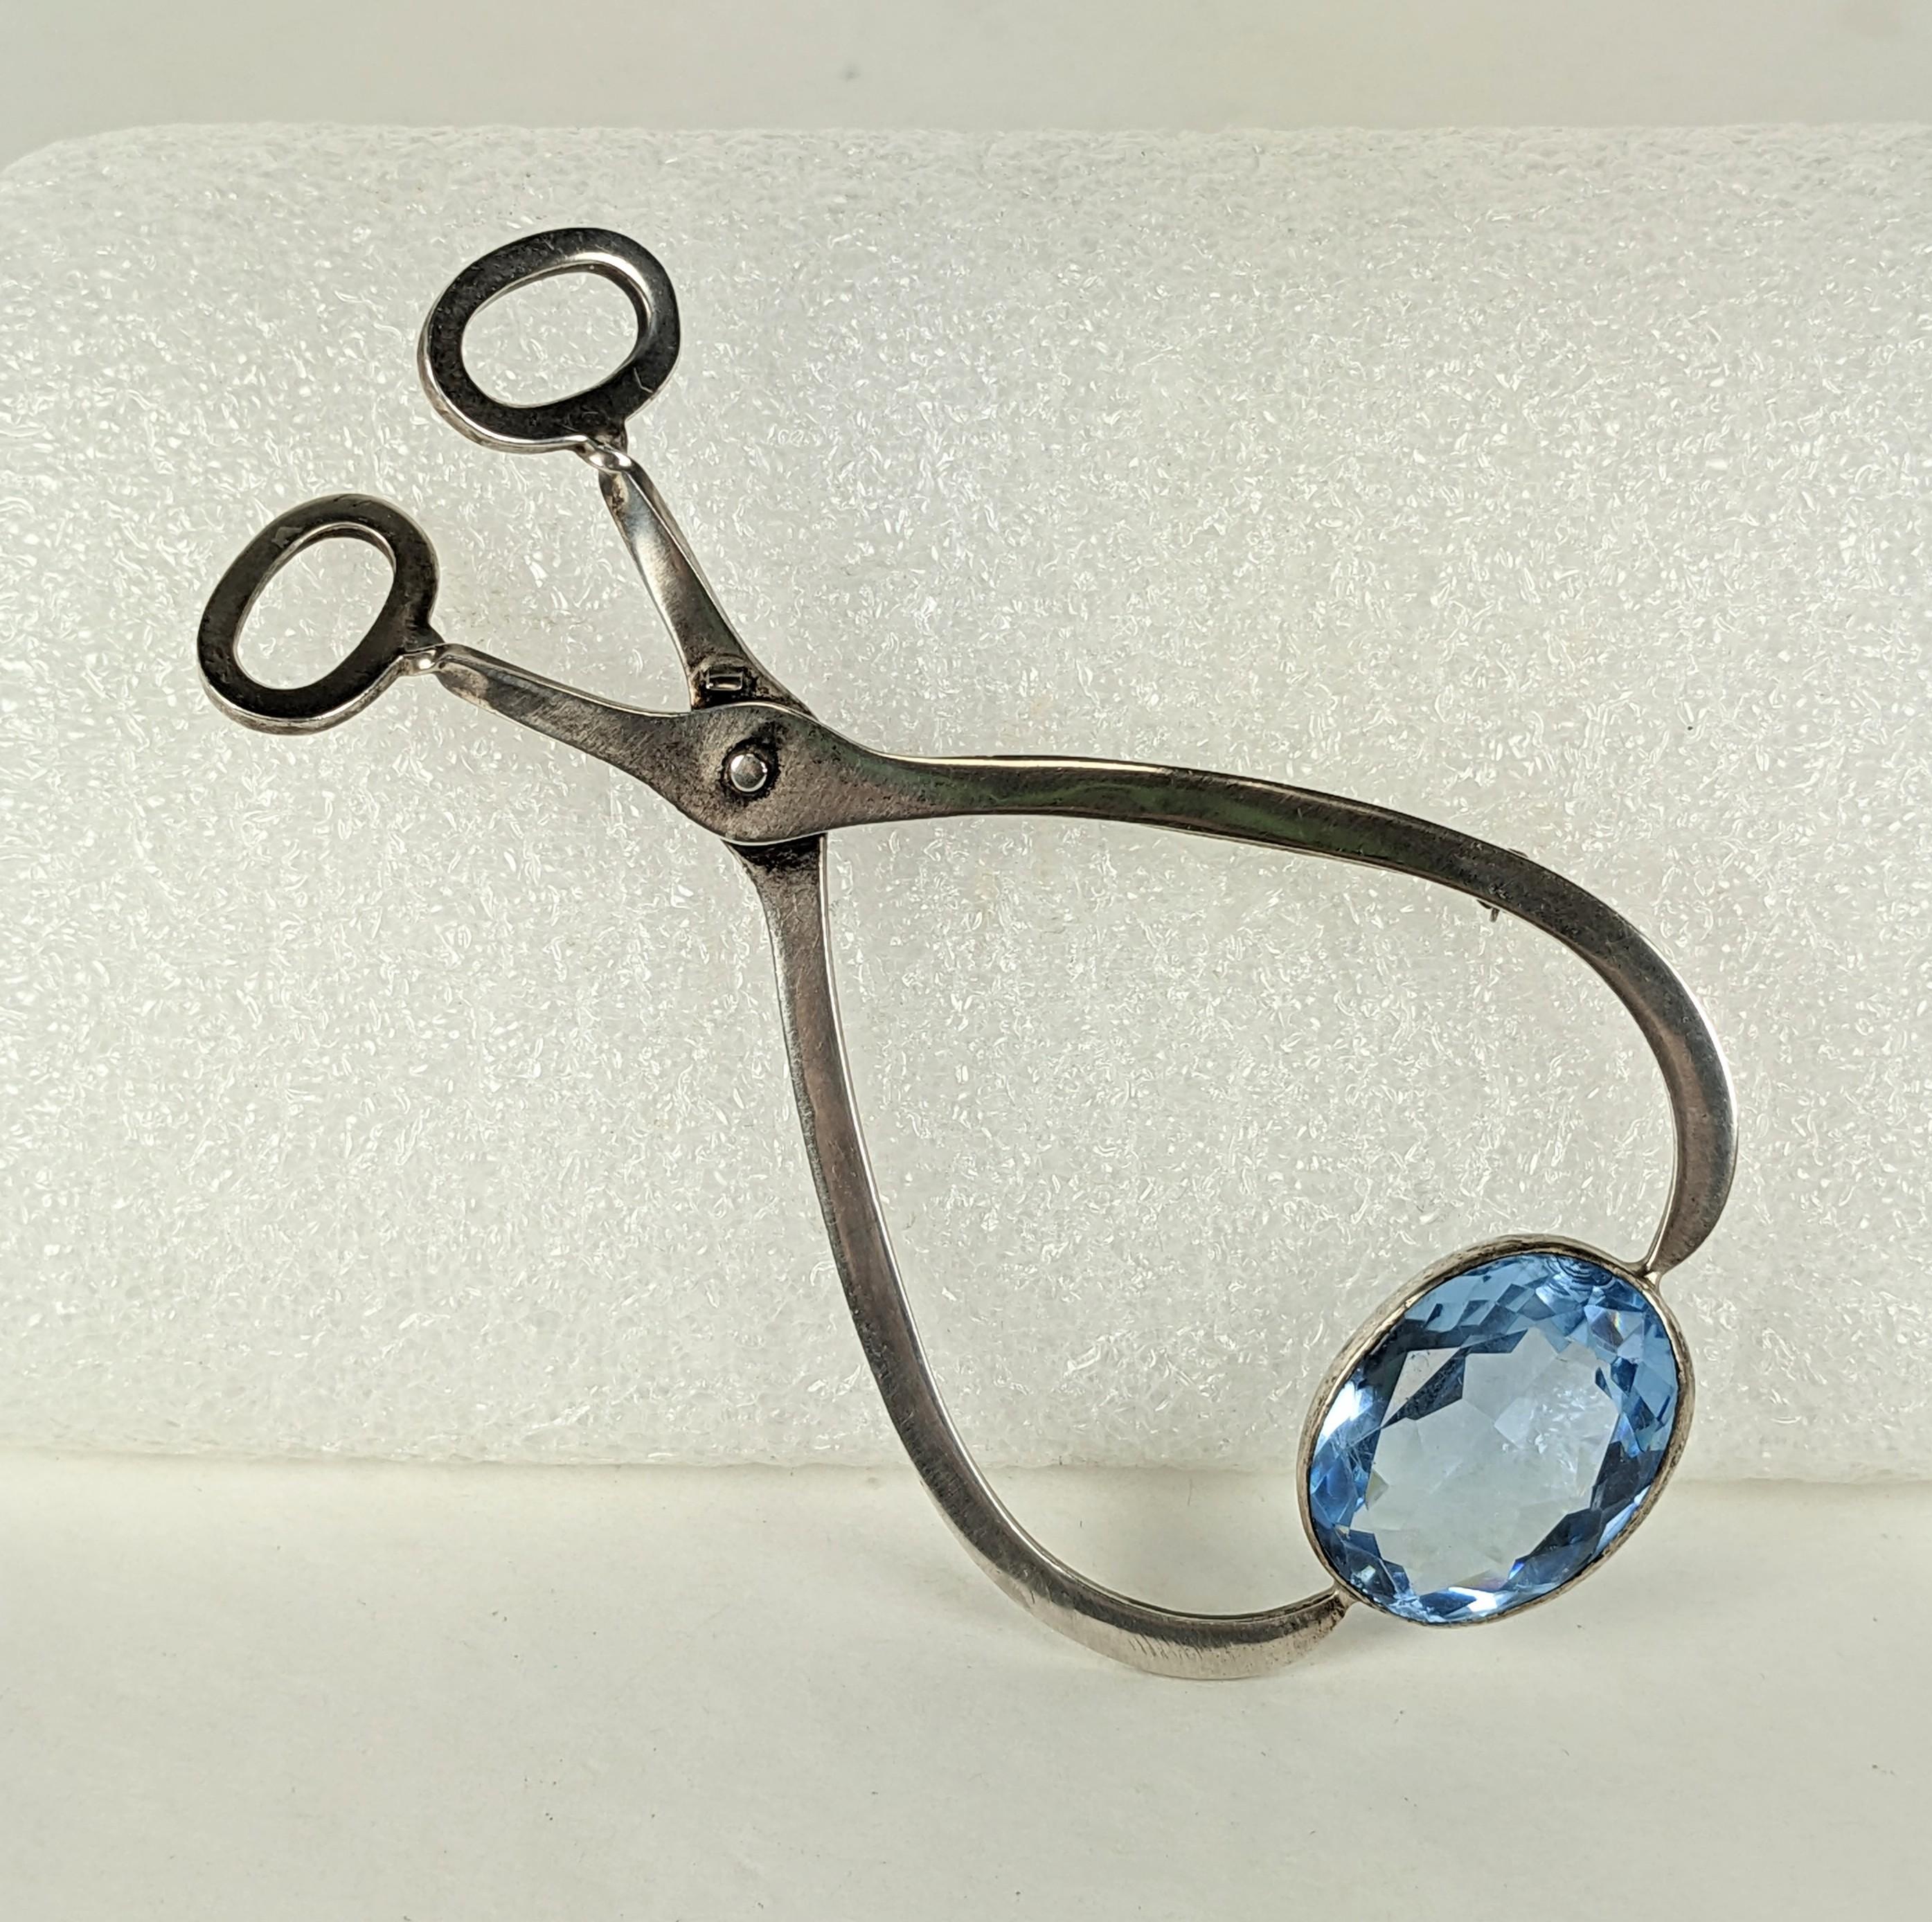 Unusual Found Assemblage Object Brooch by Studio VL from the 1980's. Composed of an antique sterling sugar tong set with a hand bezeled faux aqua stone. 4